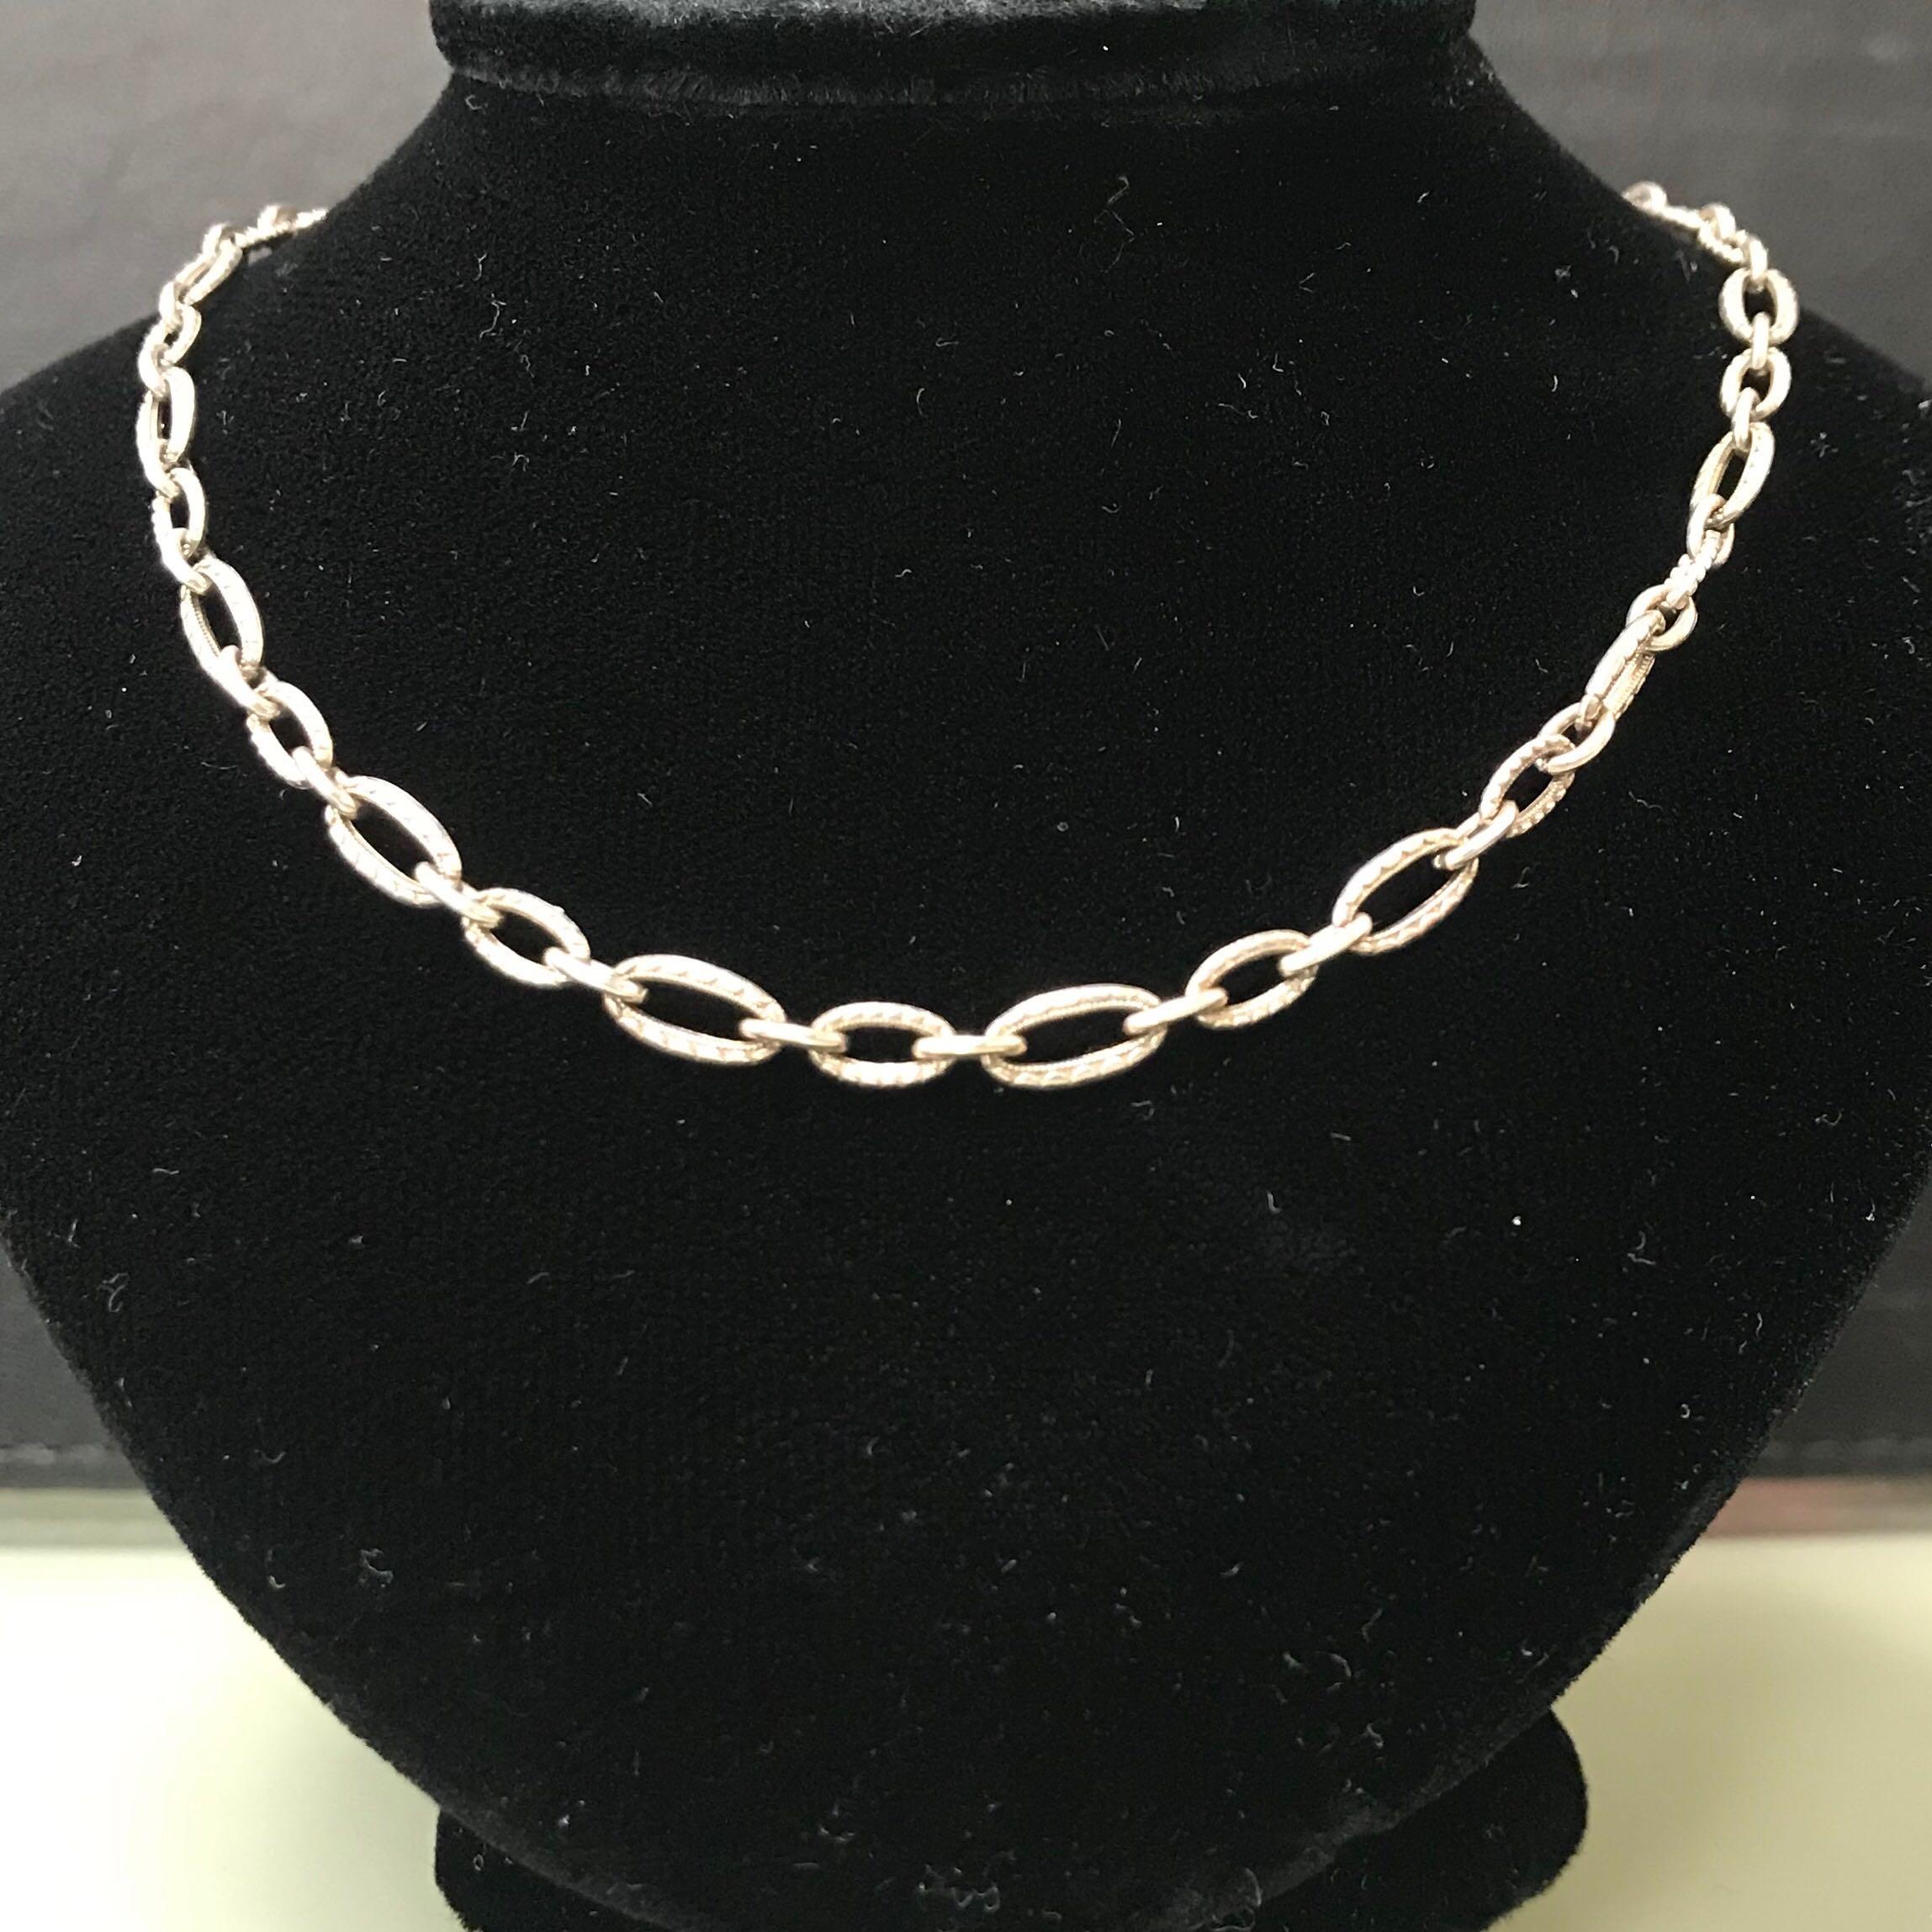 Modern Tacori 925 Sterling Silver Oval Chain Link Choker Necklace